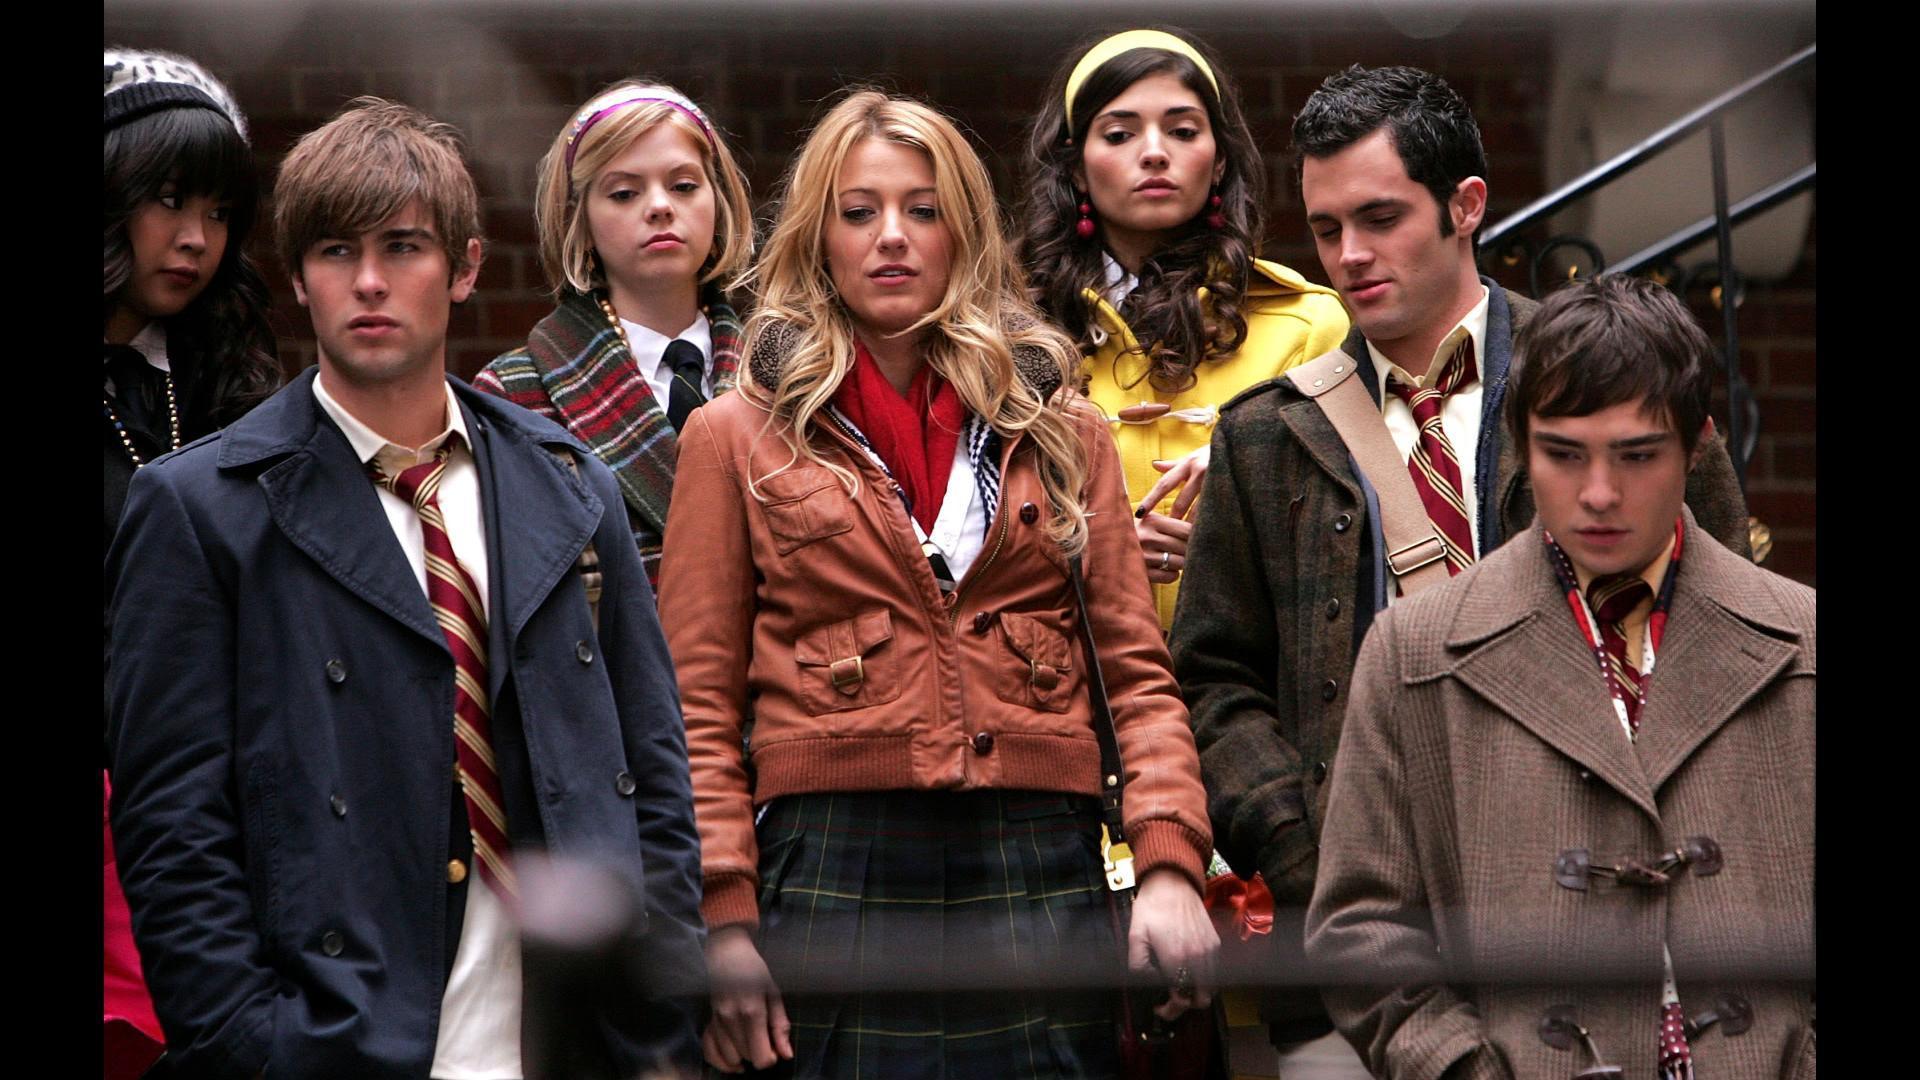 Gossip Girl' Is Getting a Reboot - Here's What to Expect